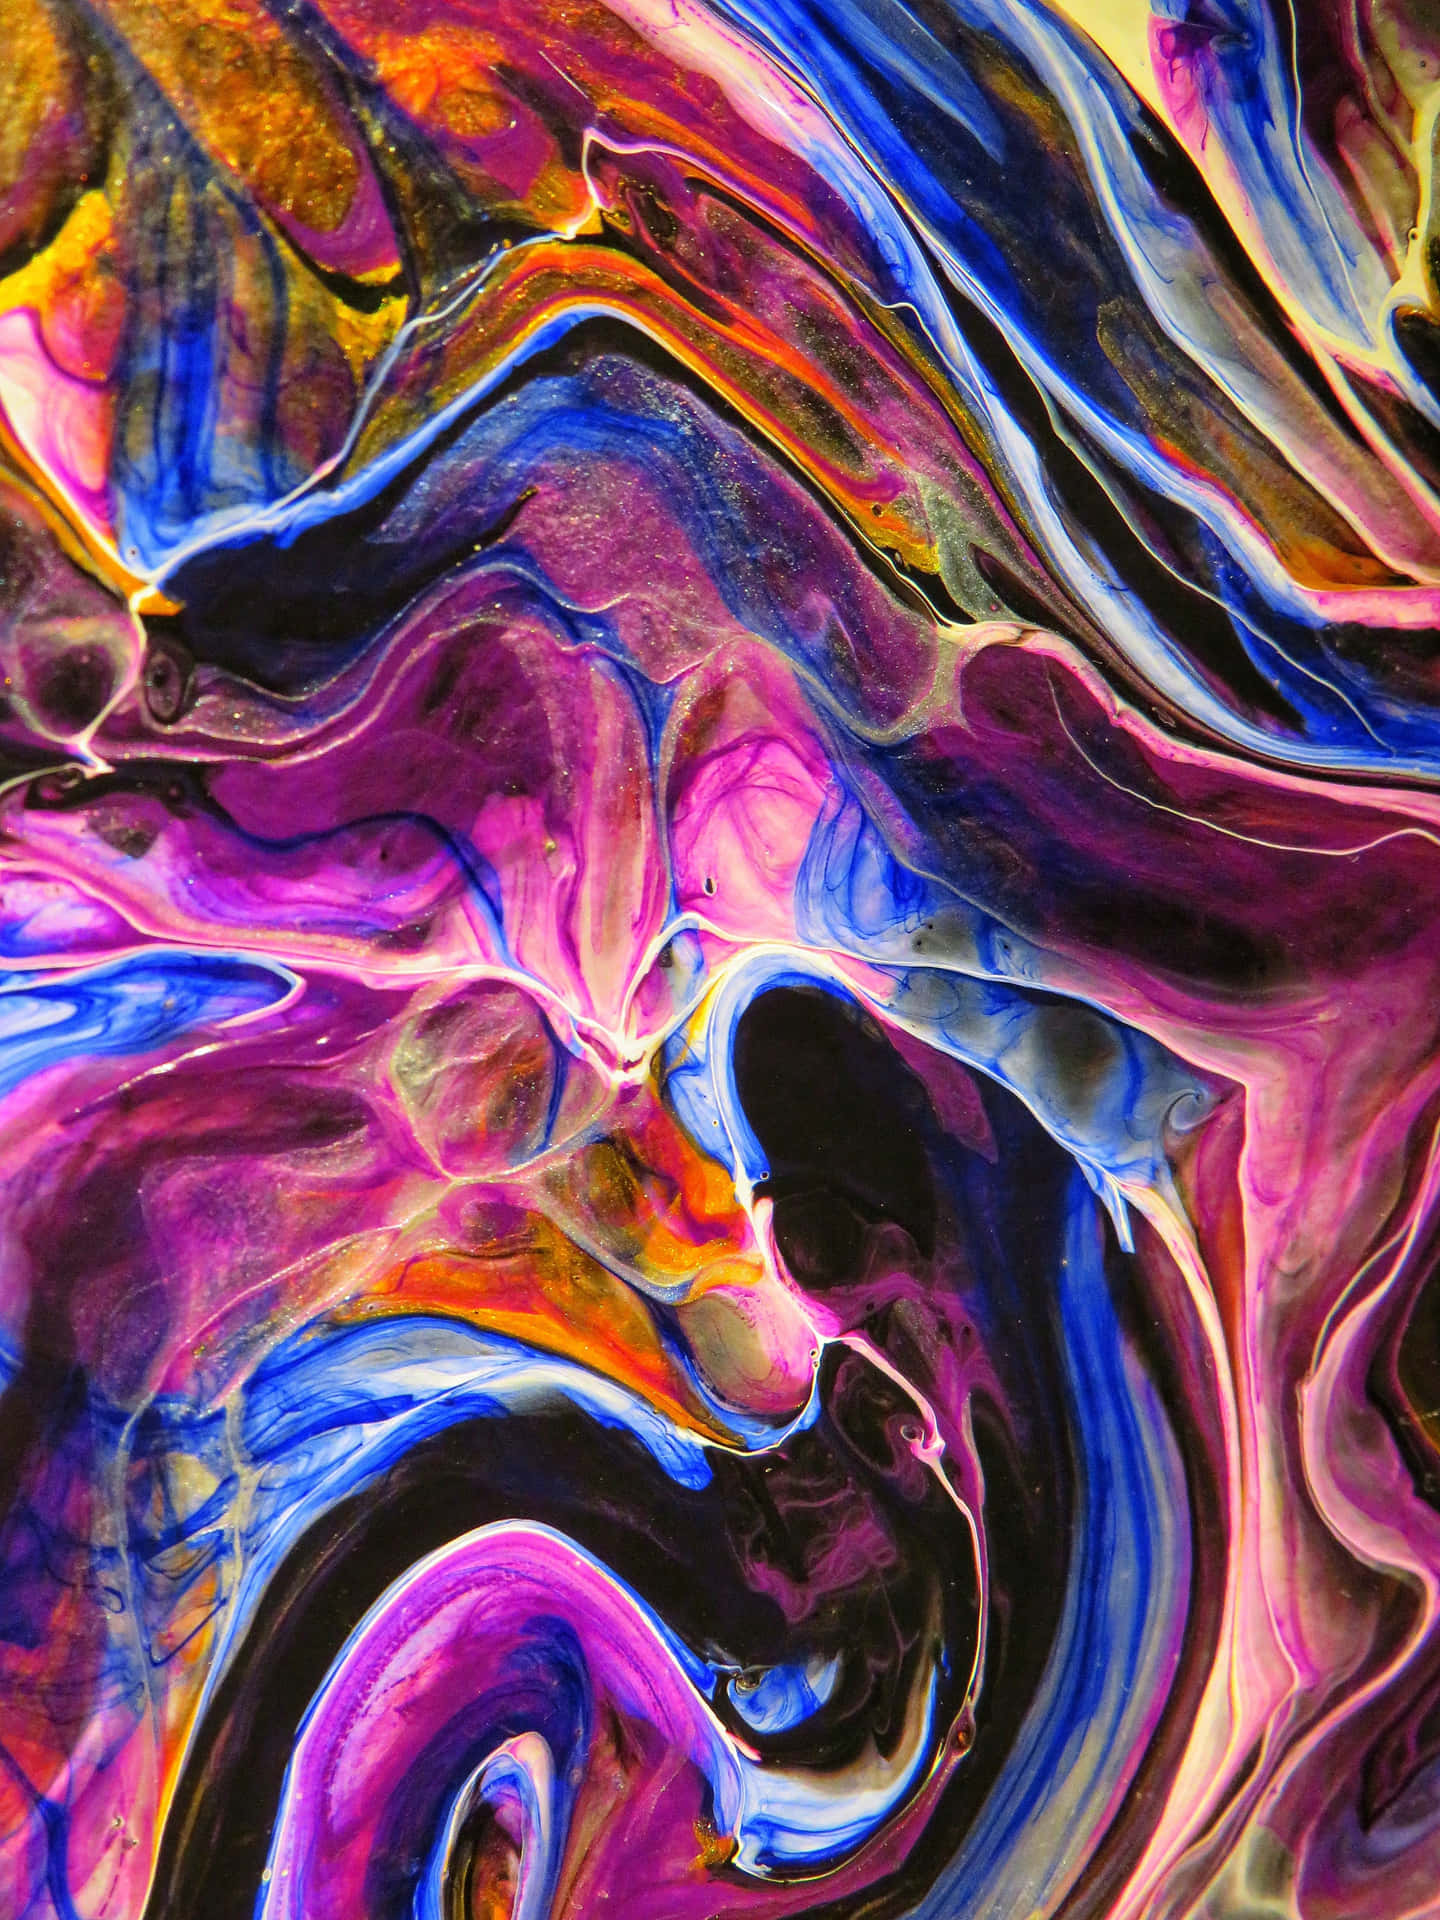 Make your way through a mesmerizing swirl of color Wallpaper